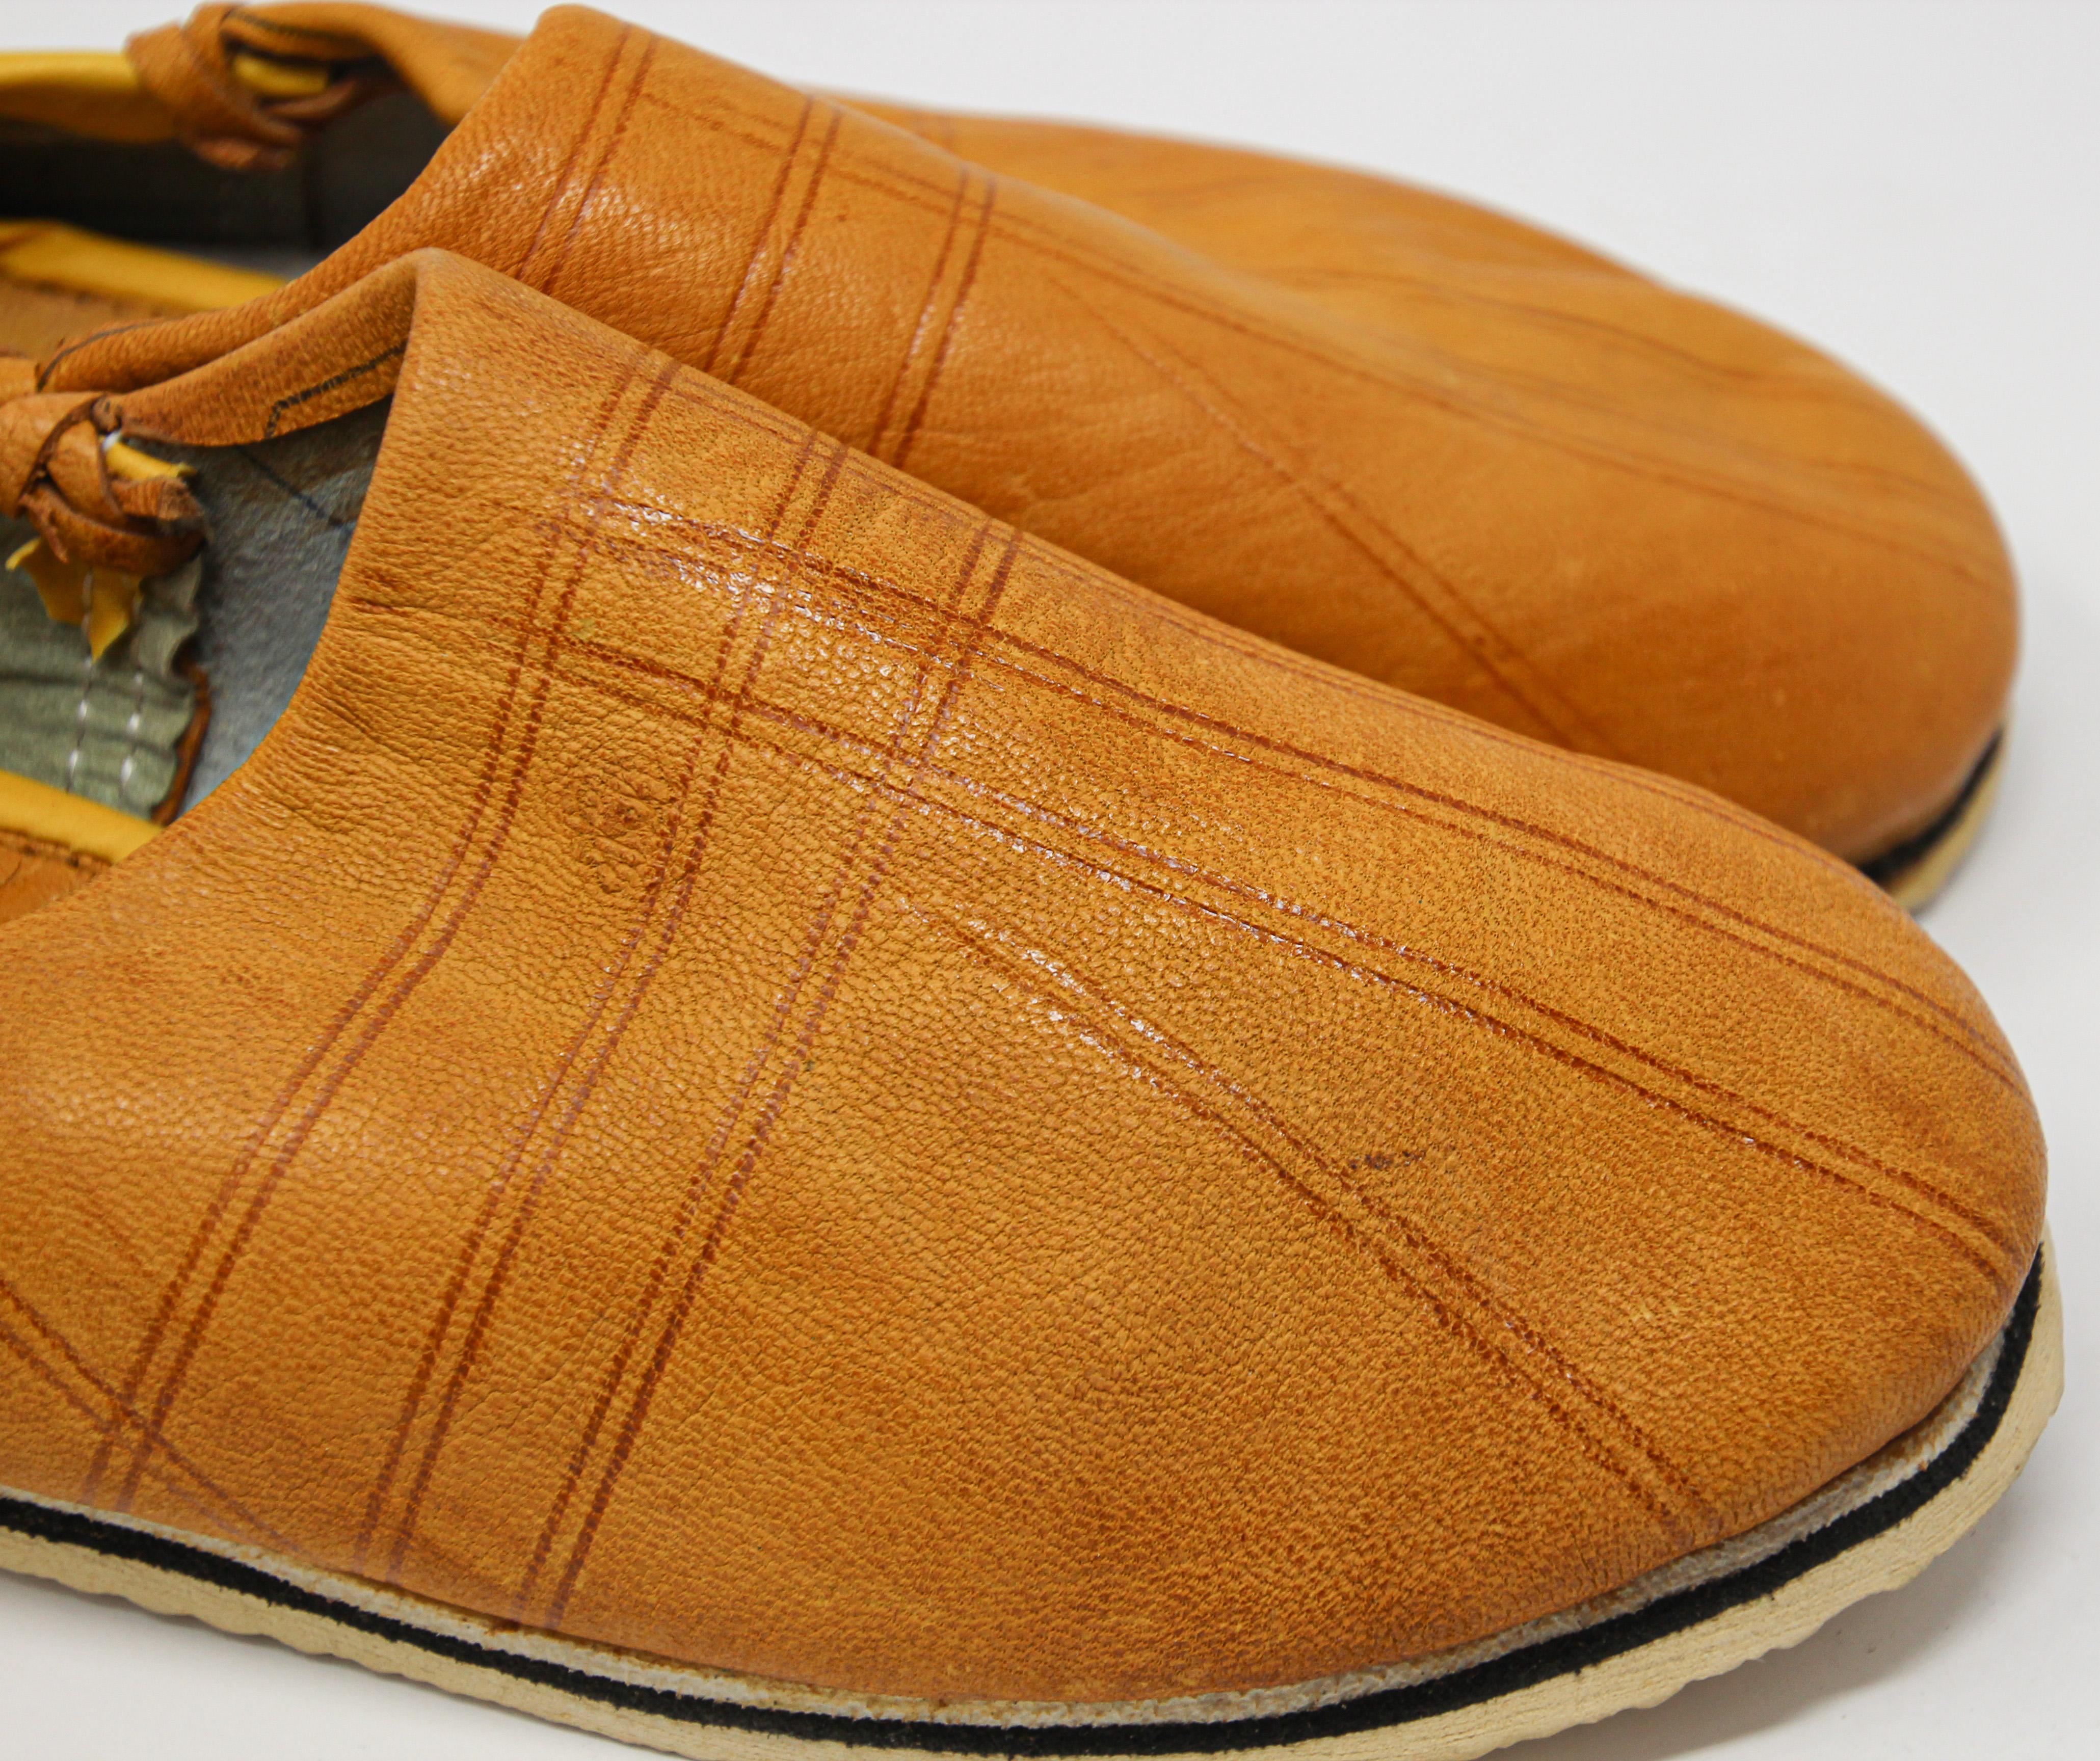 Moroccan Hand Tooled Yellow Leather Slippers In Good Condition For Sale In North Hollywood, CA